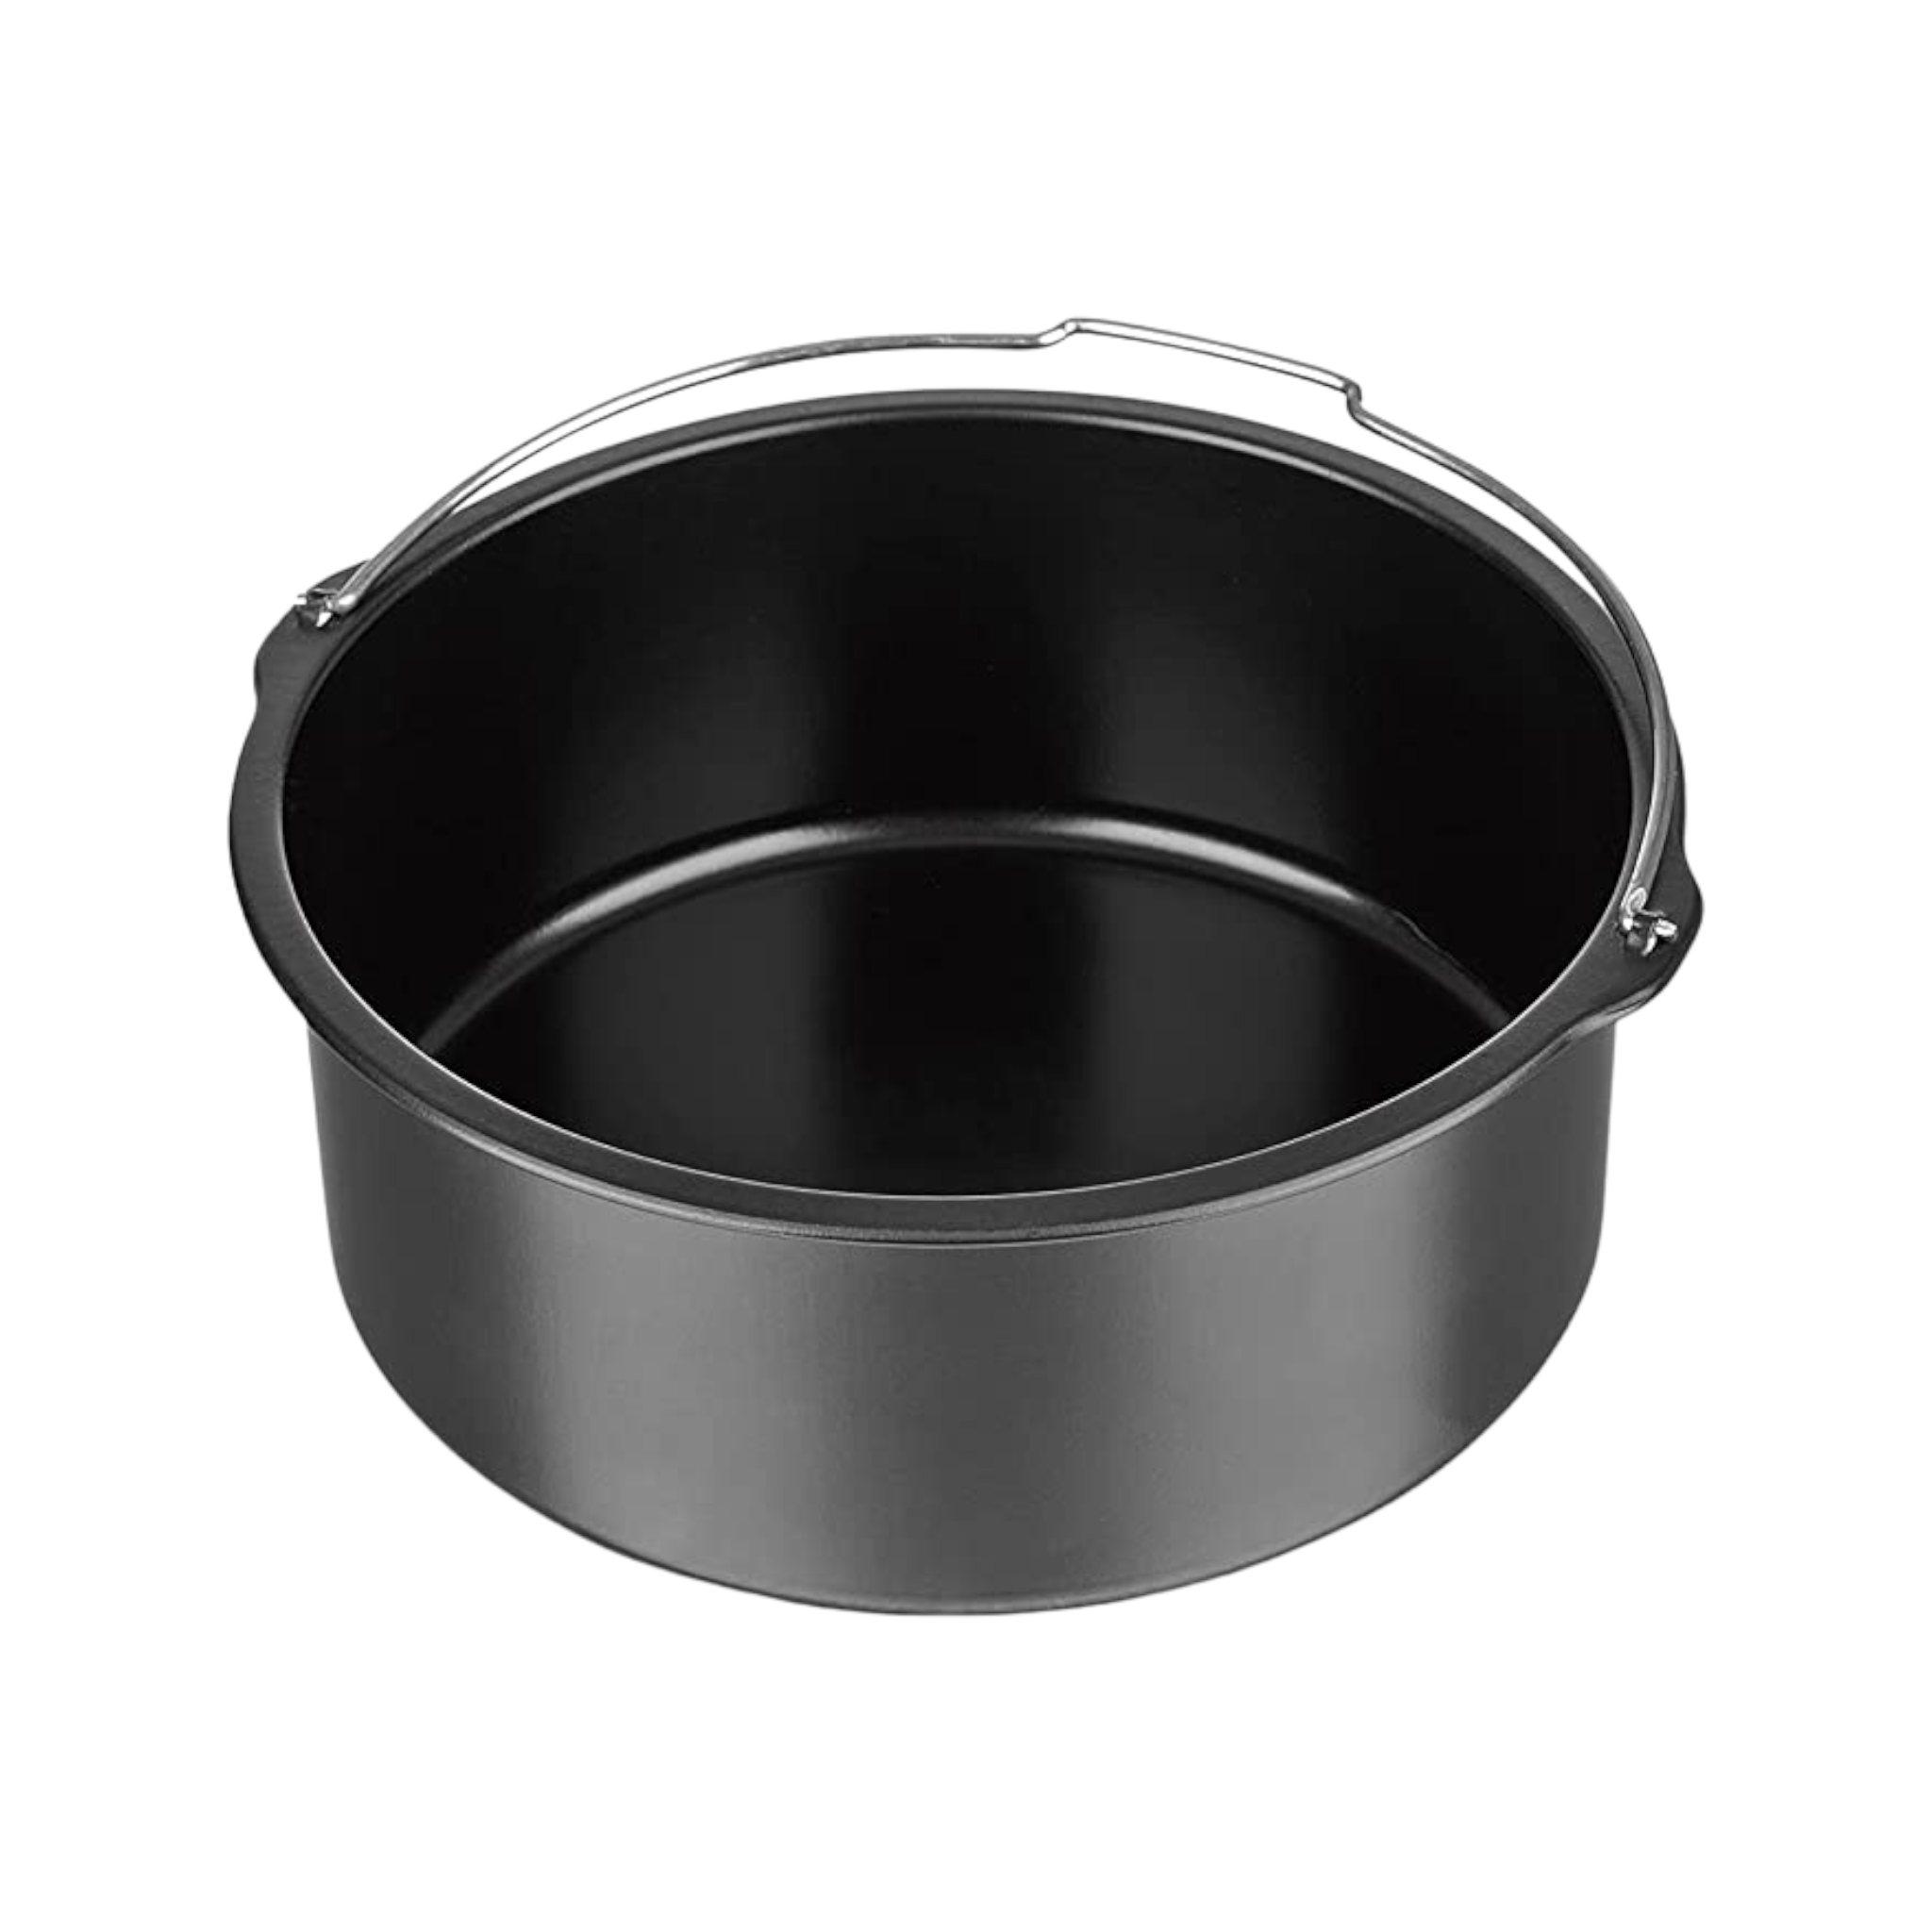 Baking Cake Pan Carry with carry handle 16cm 5578